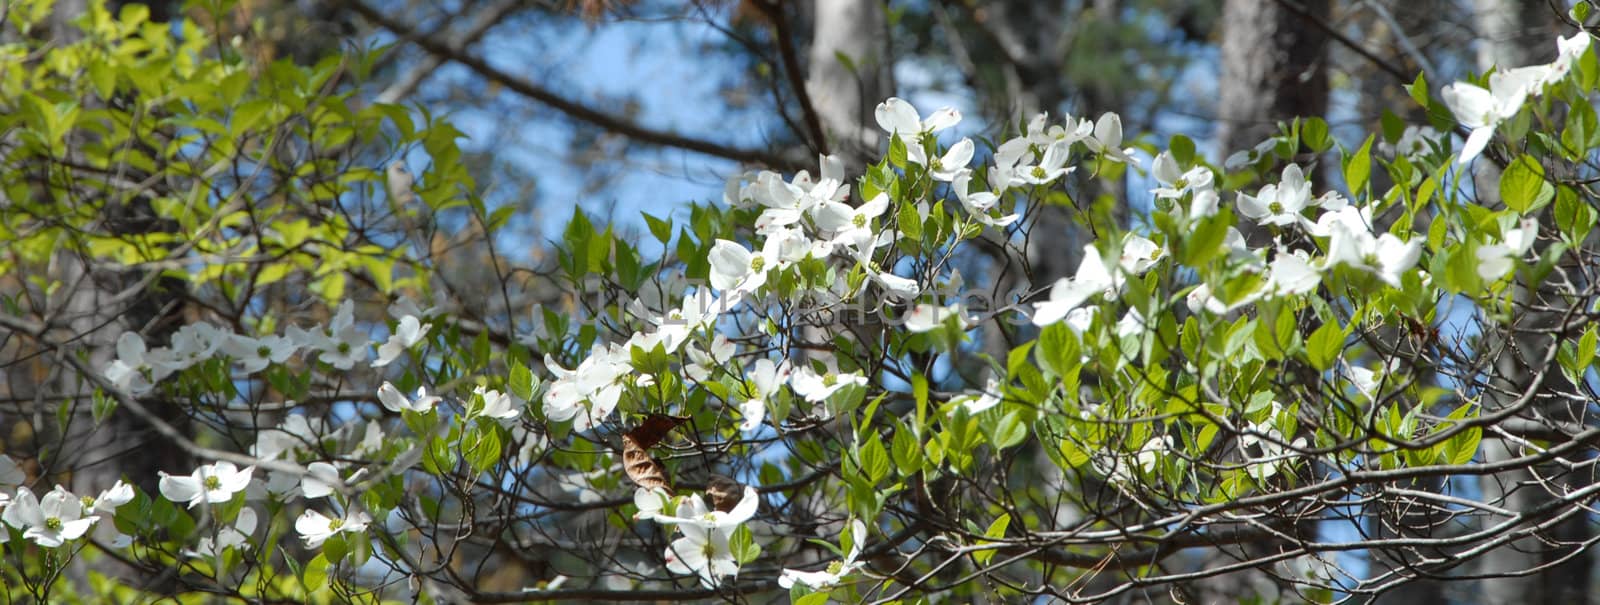 Dogwood blooms shown during the spring of the year